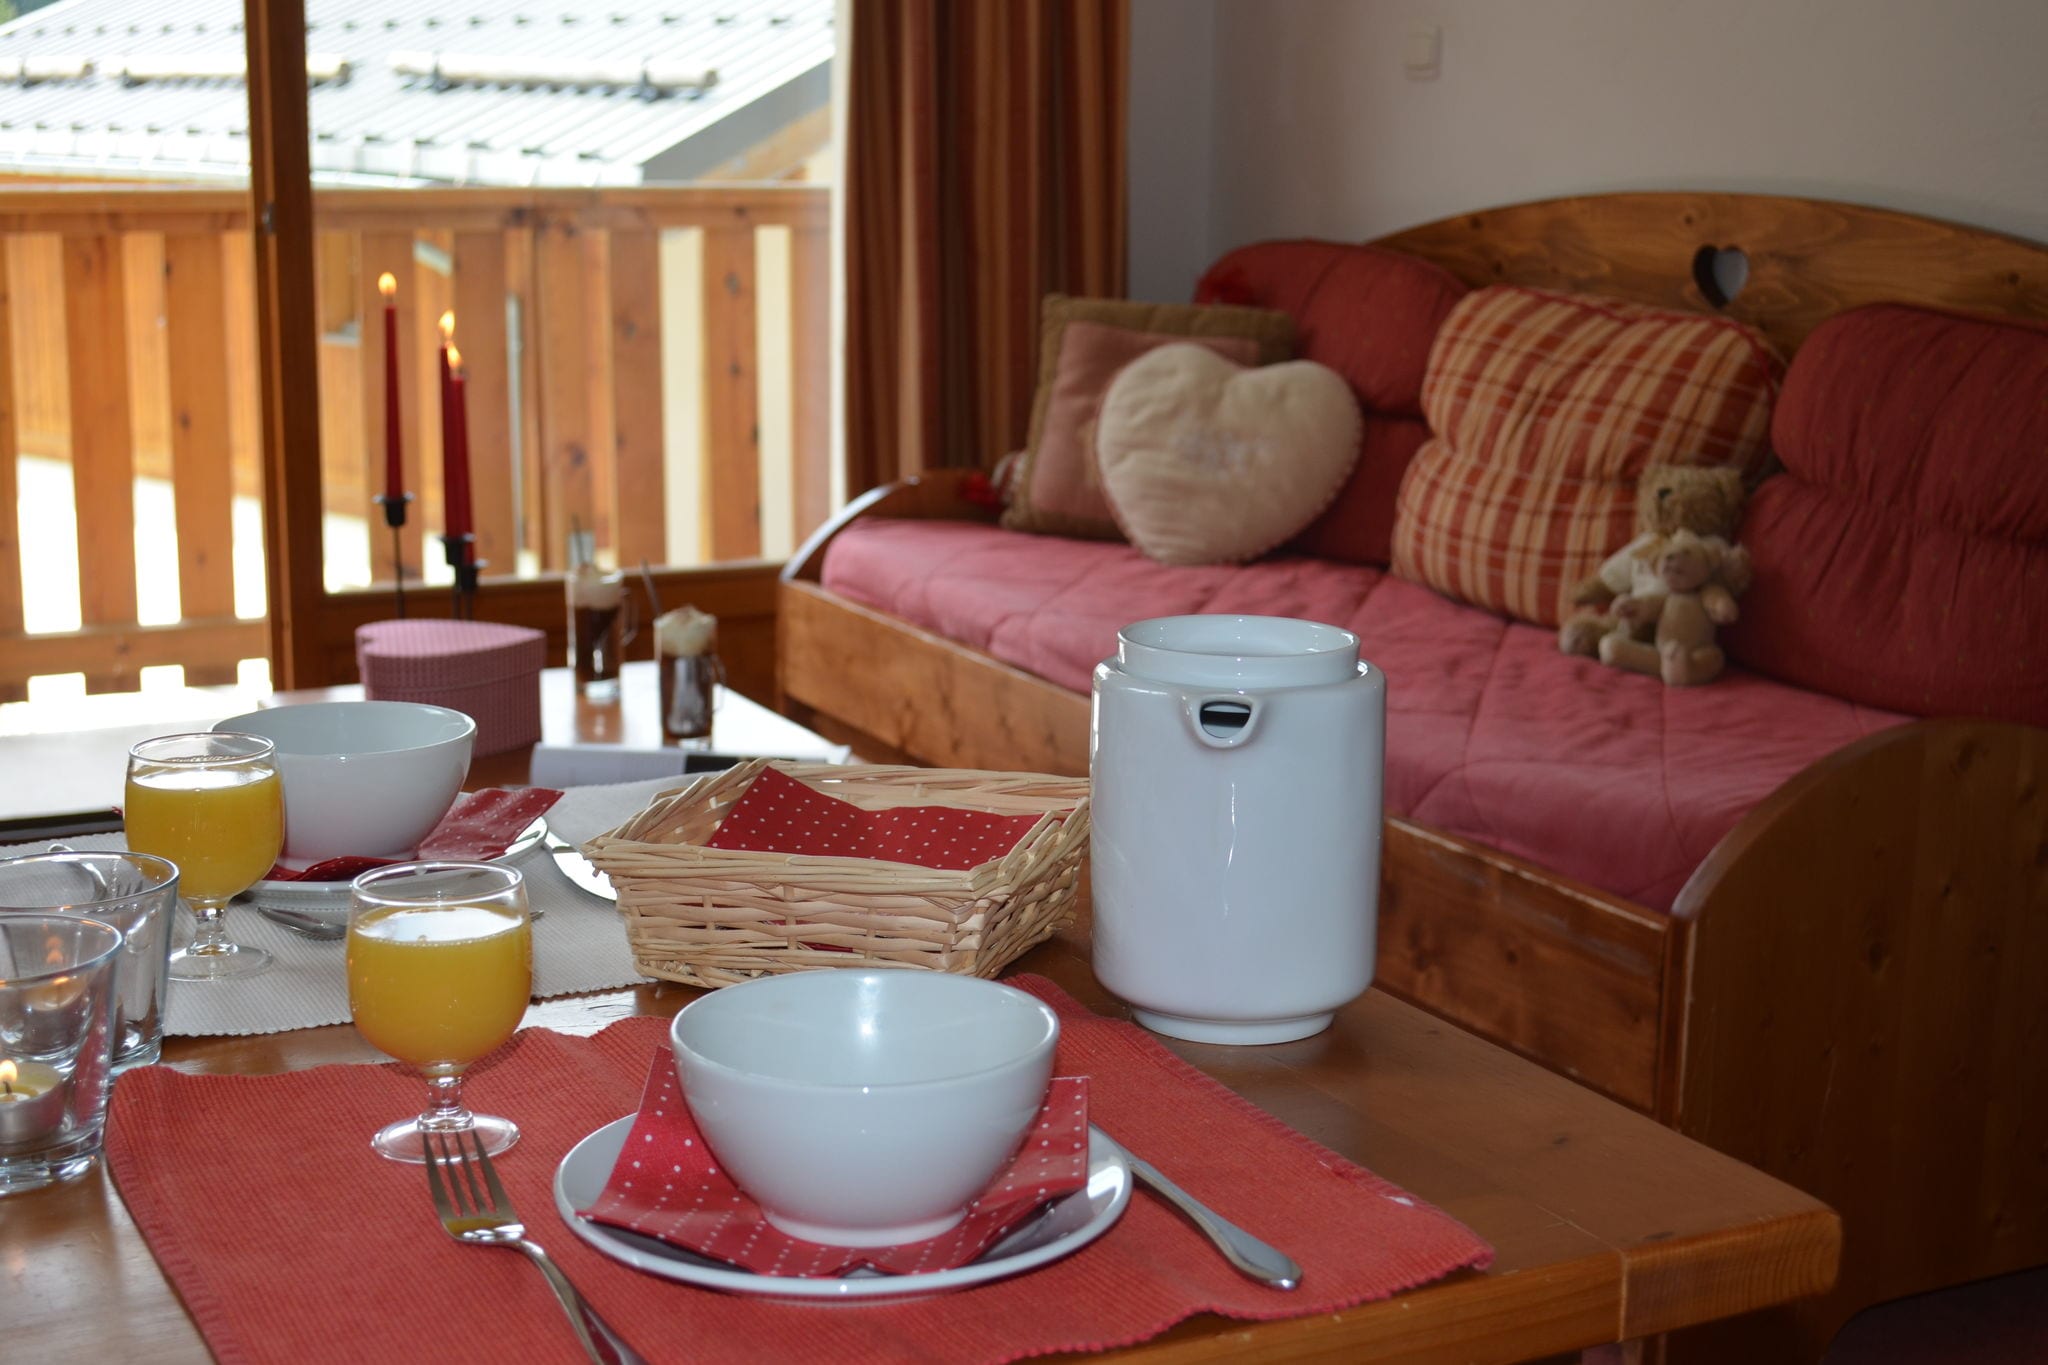 Comfortable studio, located at the ski slopes in Valfréjus